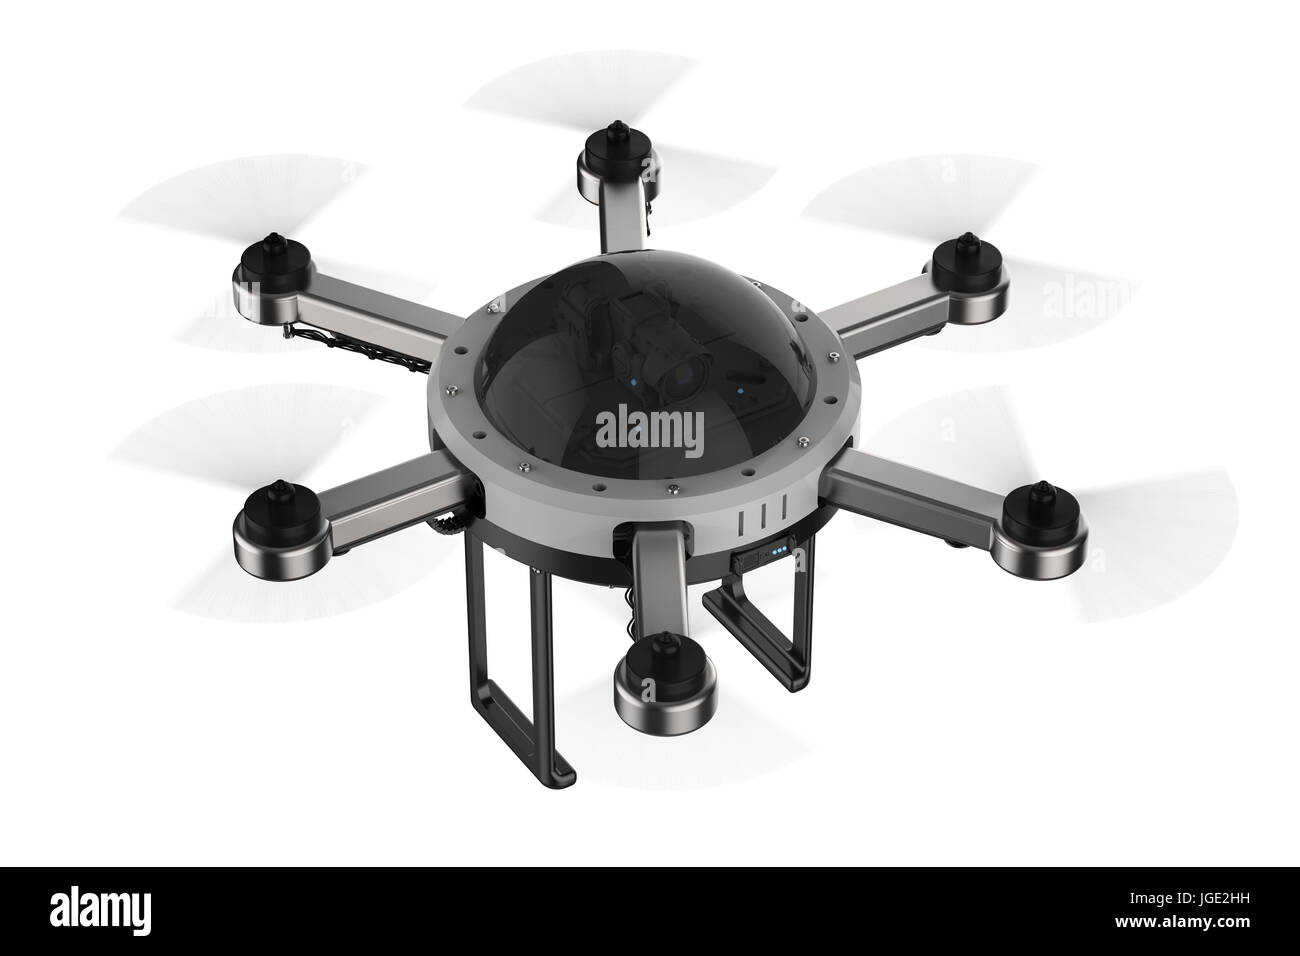 Drone rendu 3d appareil photo avec six lames spinning isolated on white Banque D'Images